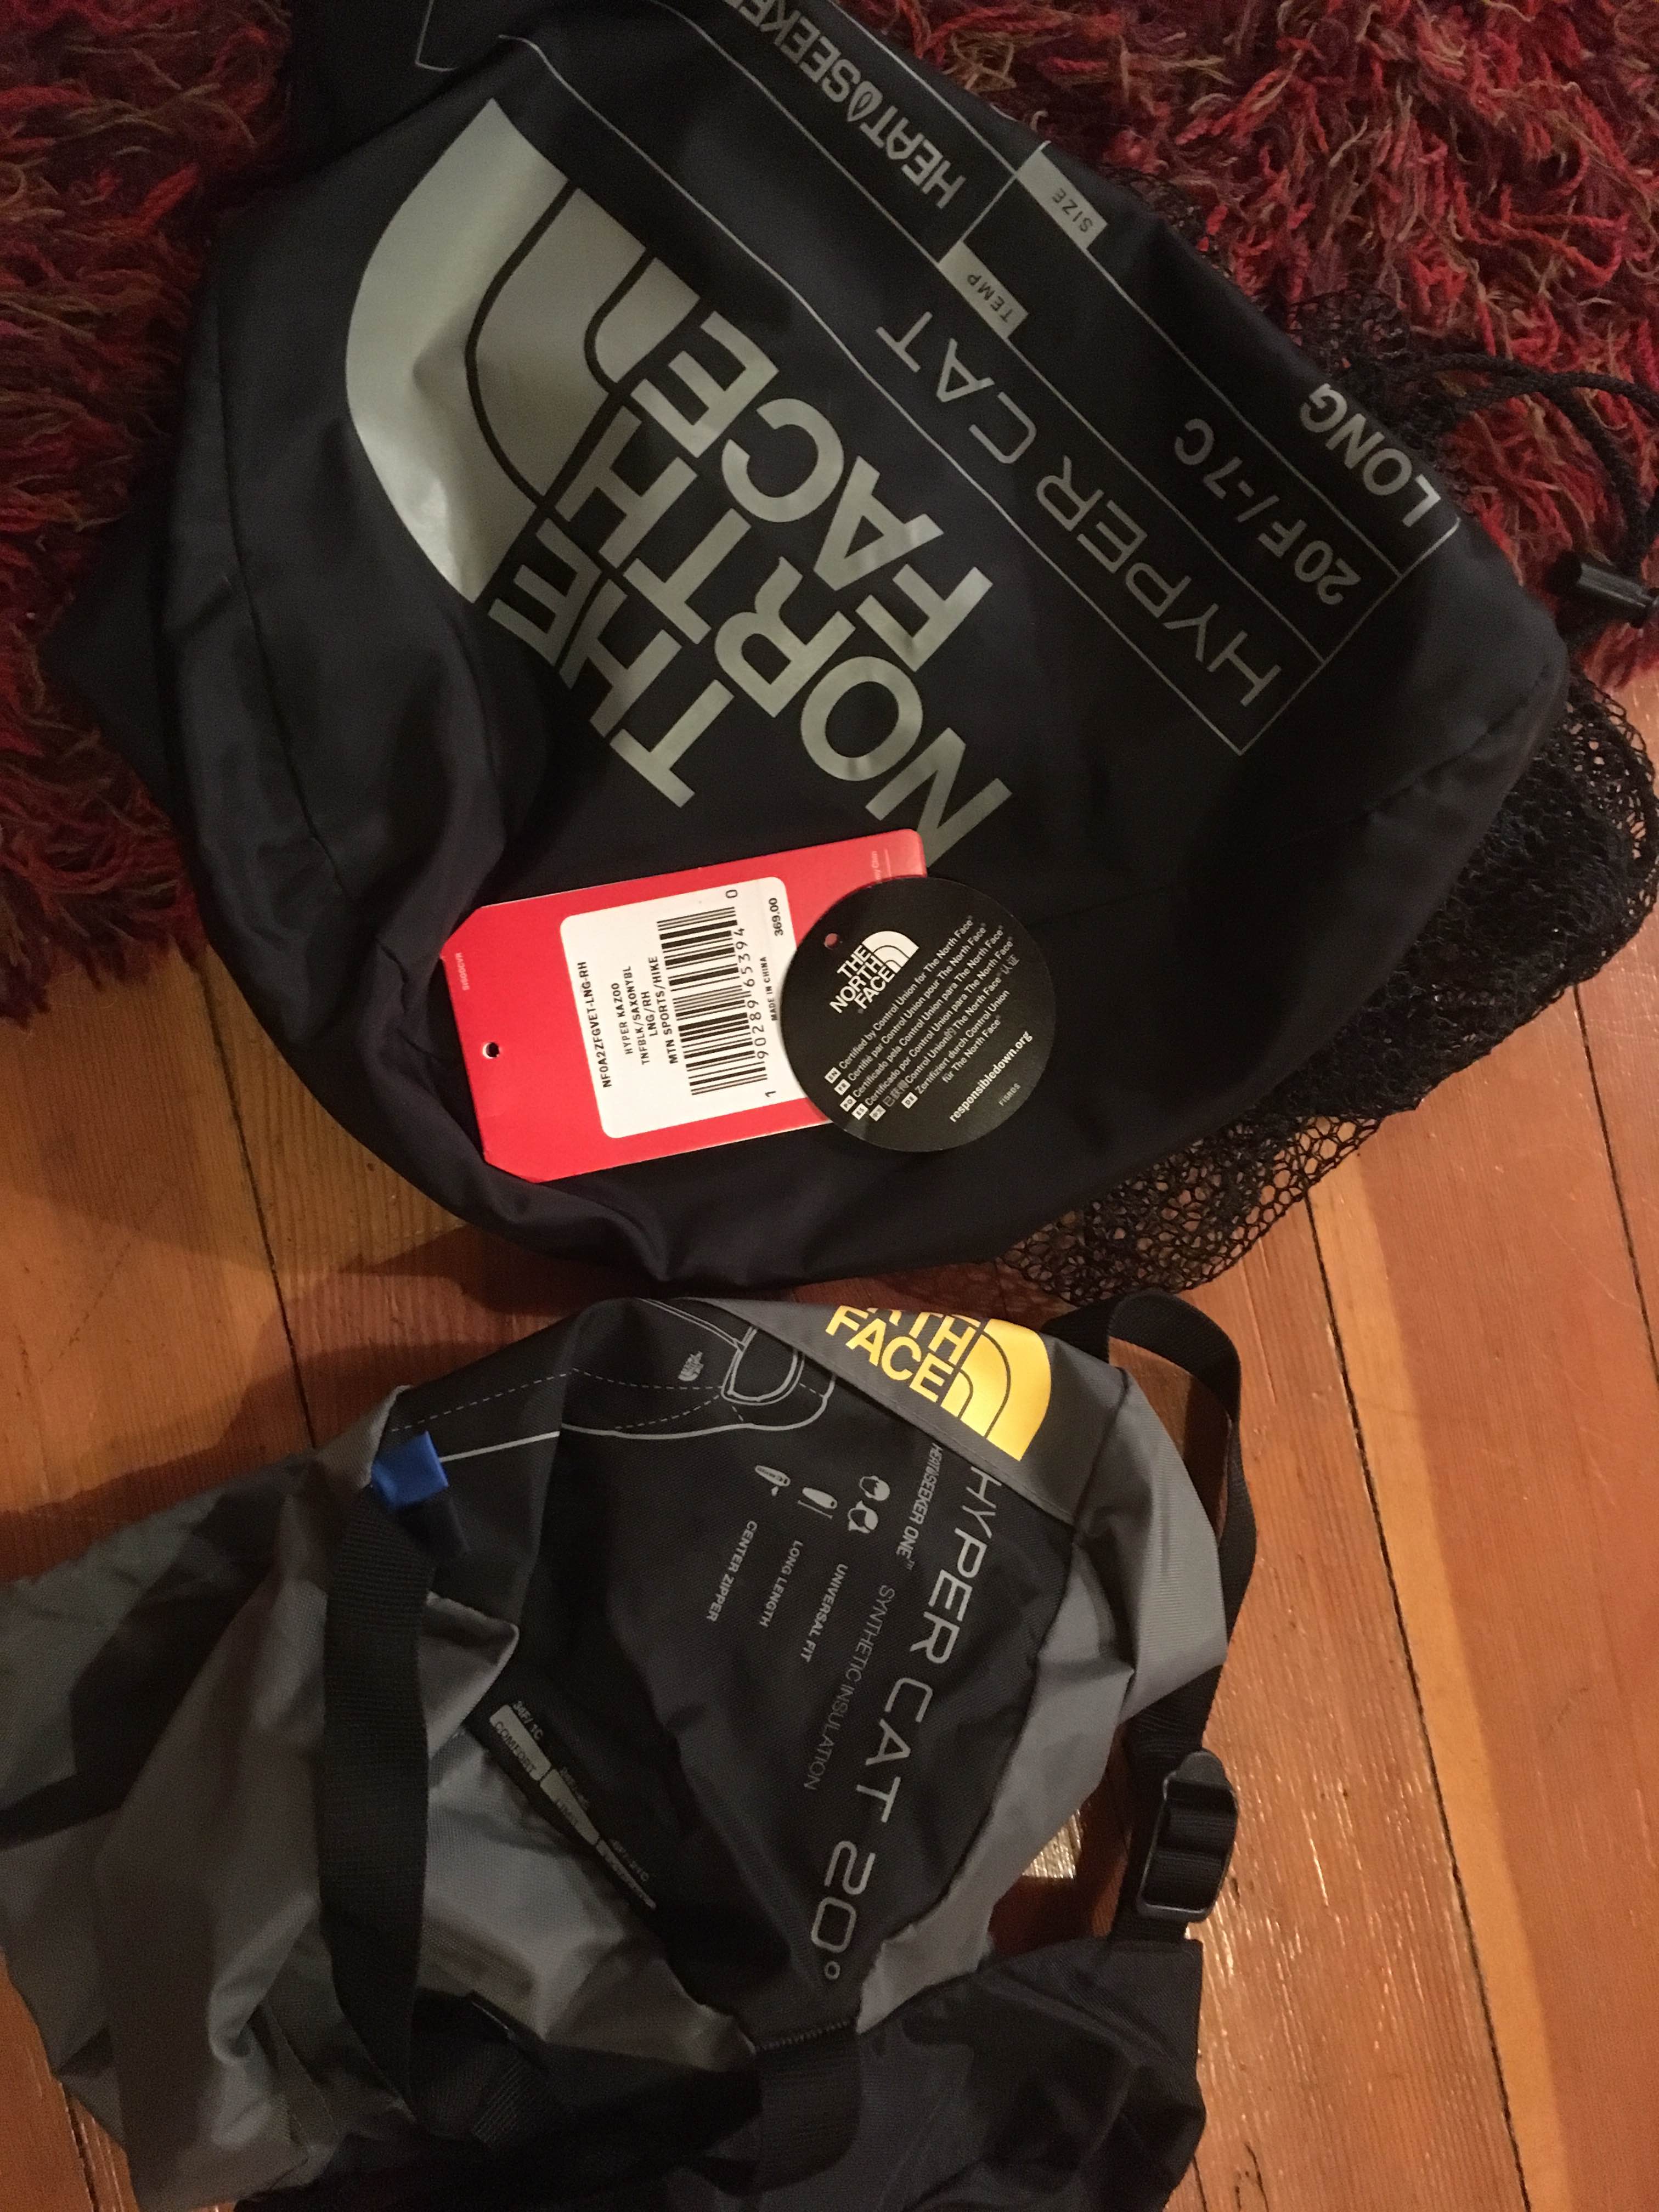 north face hyper cat review